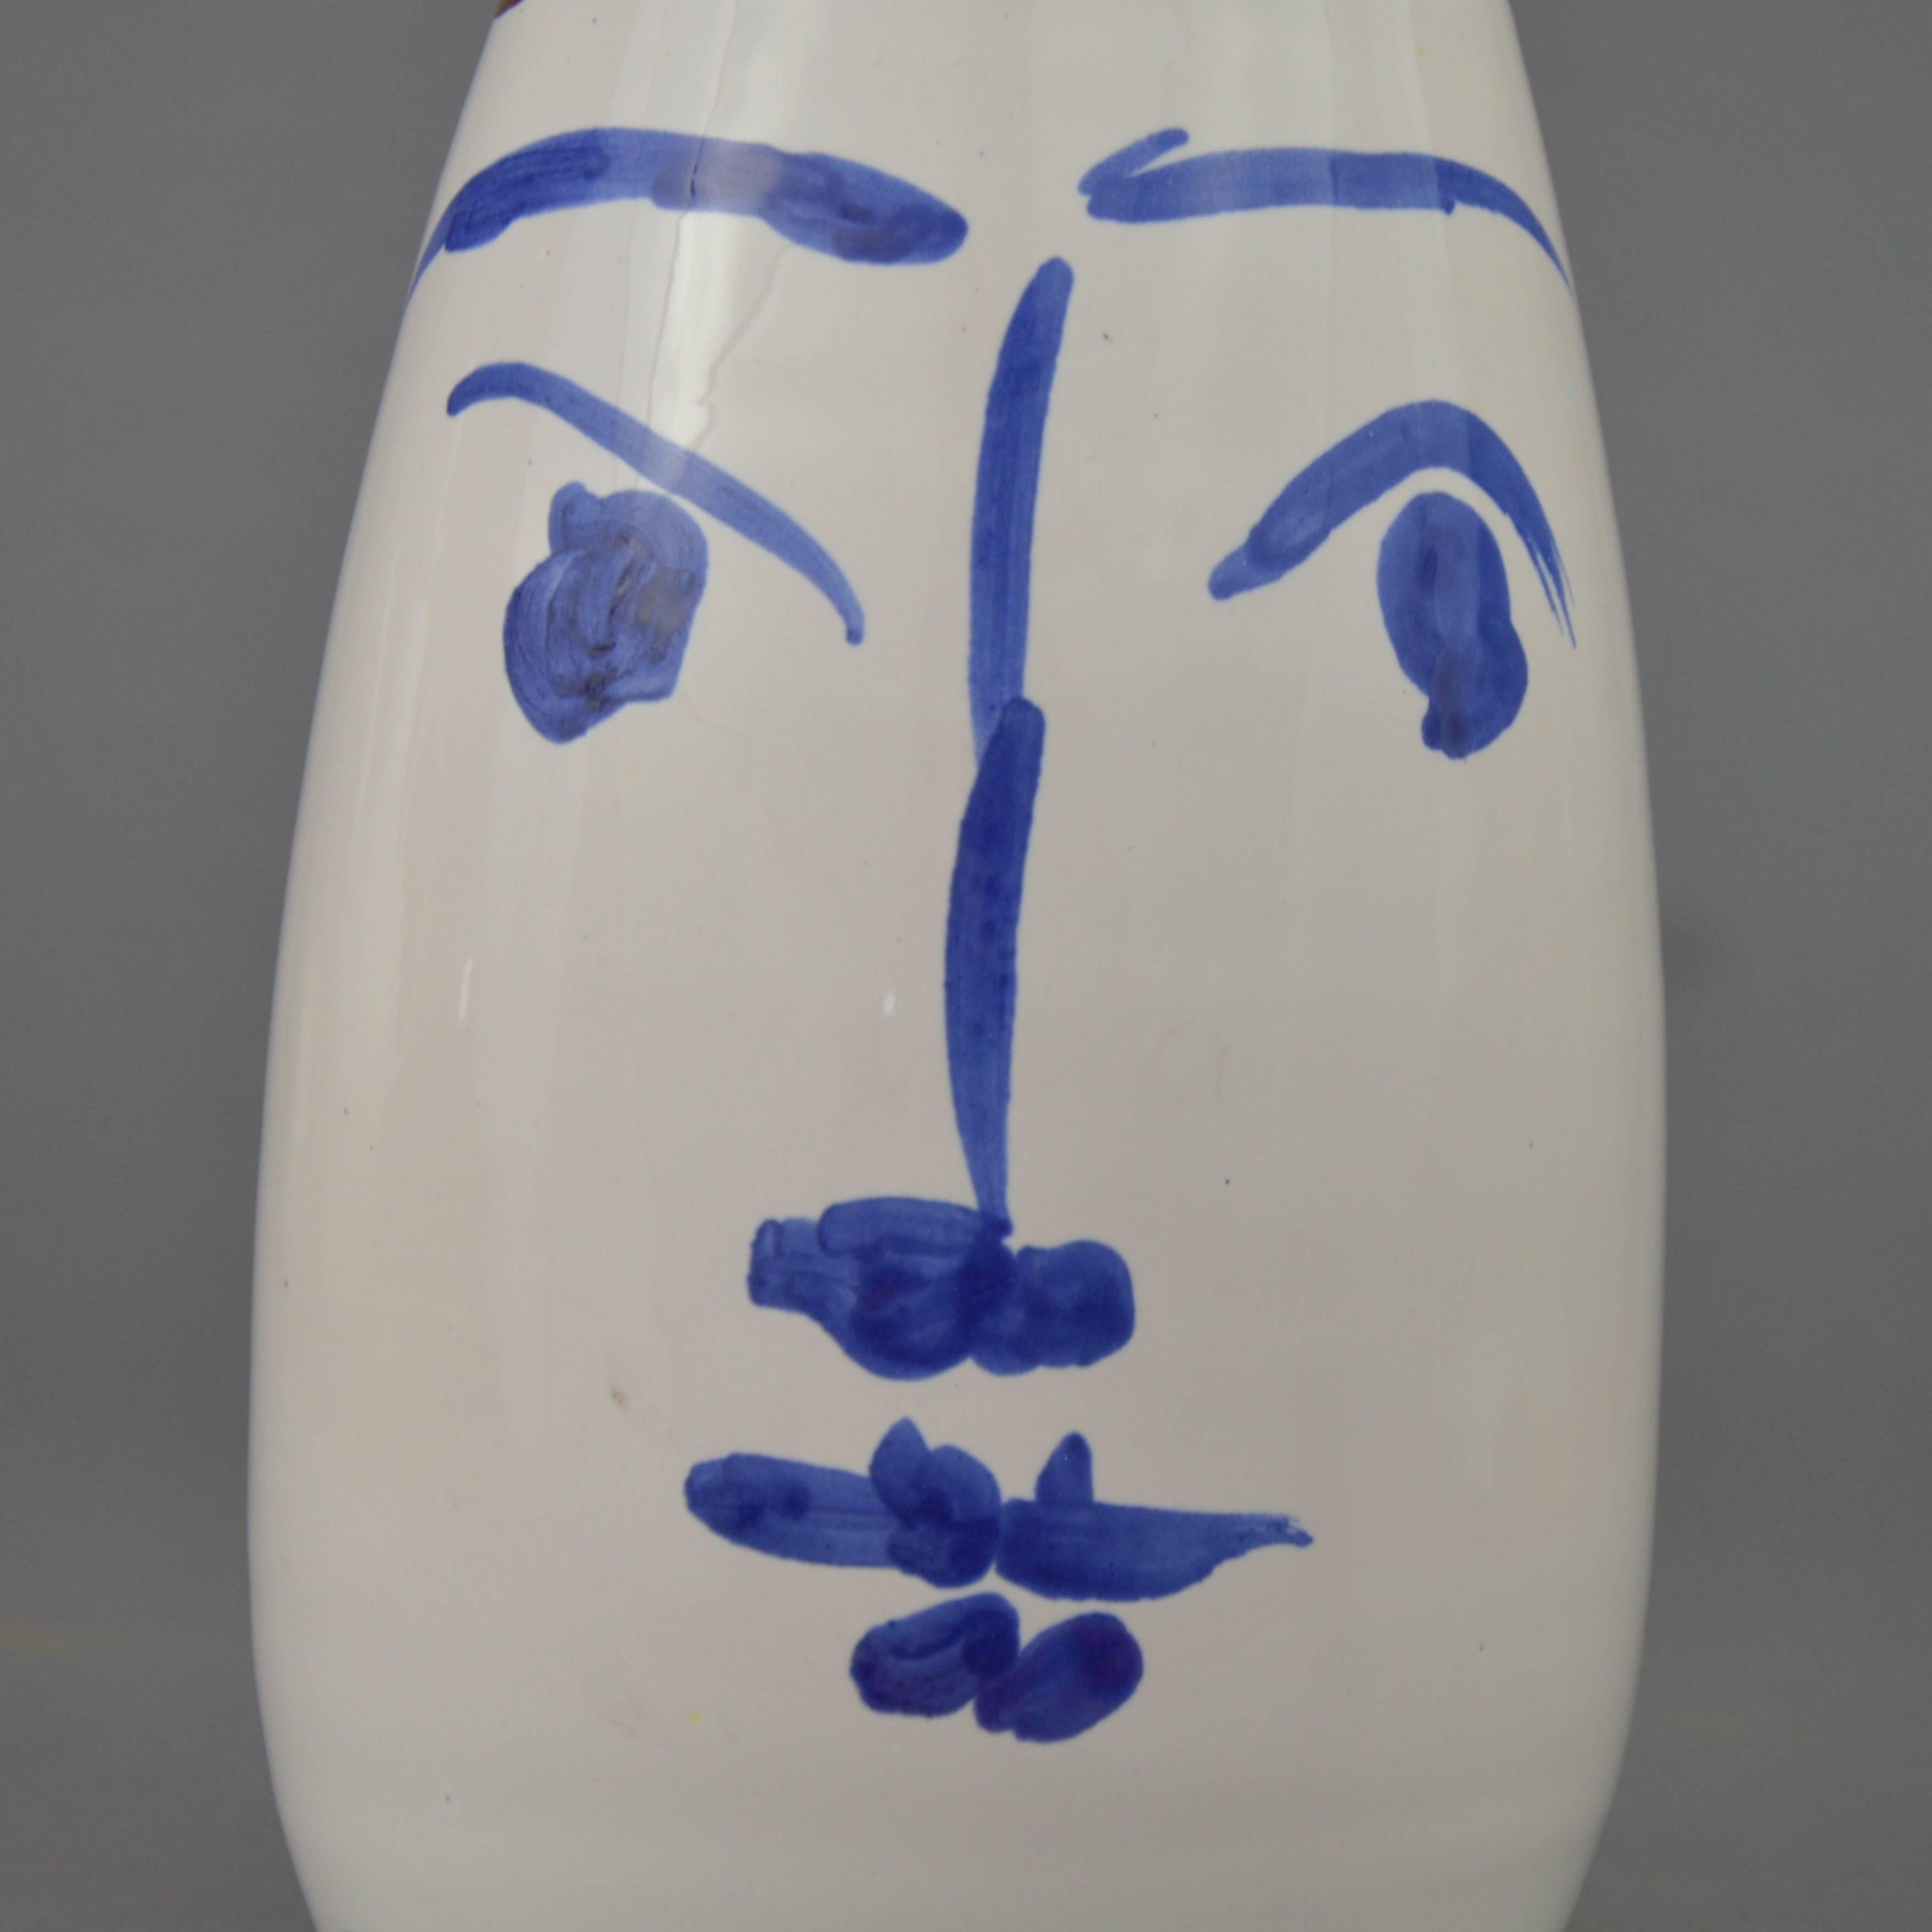 Pablo Picasso Madoura Ceramic Turned Pitcher Face Tankard, 1959 In Excellent Condition For Sale In Brussels, BE